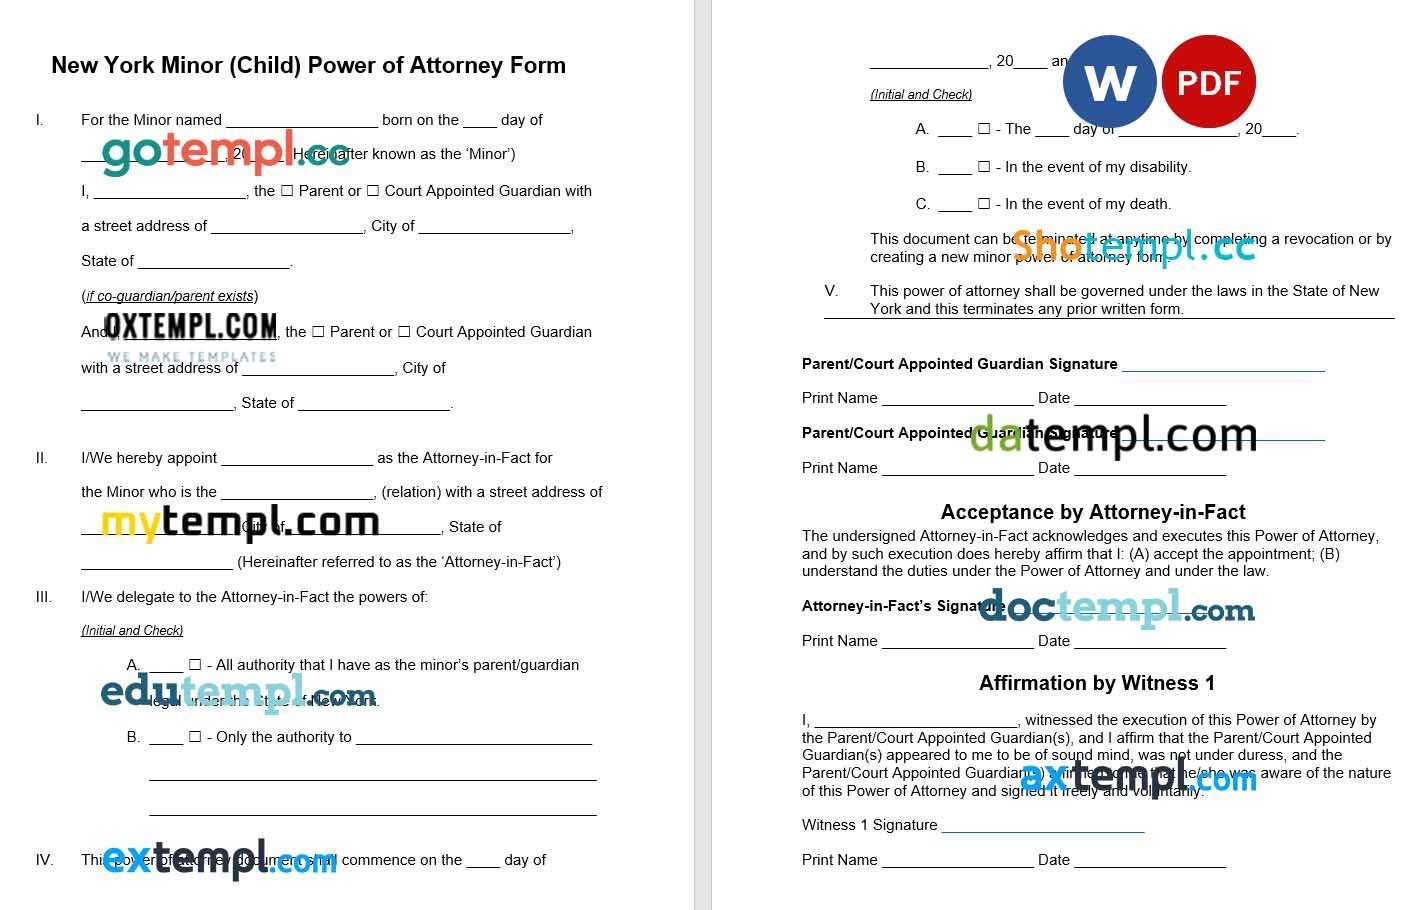 New York Minor Child Parental Power of Attorney example, fully editable